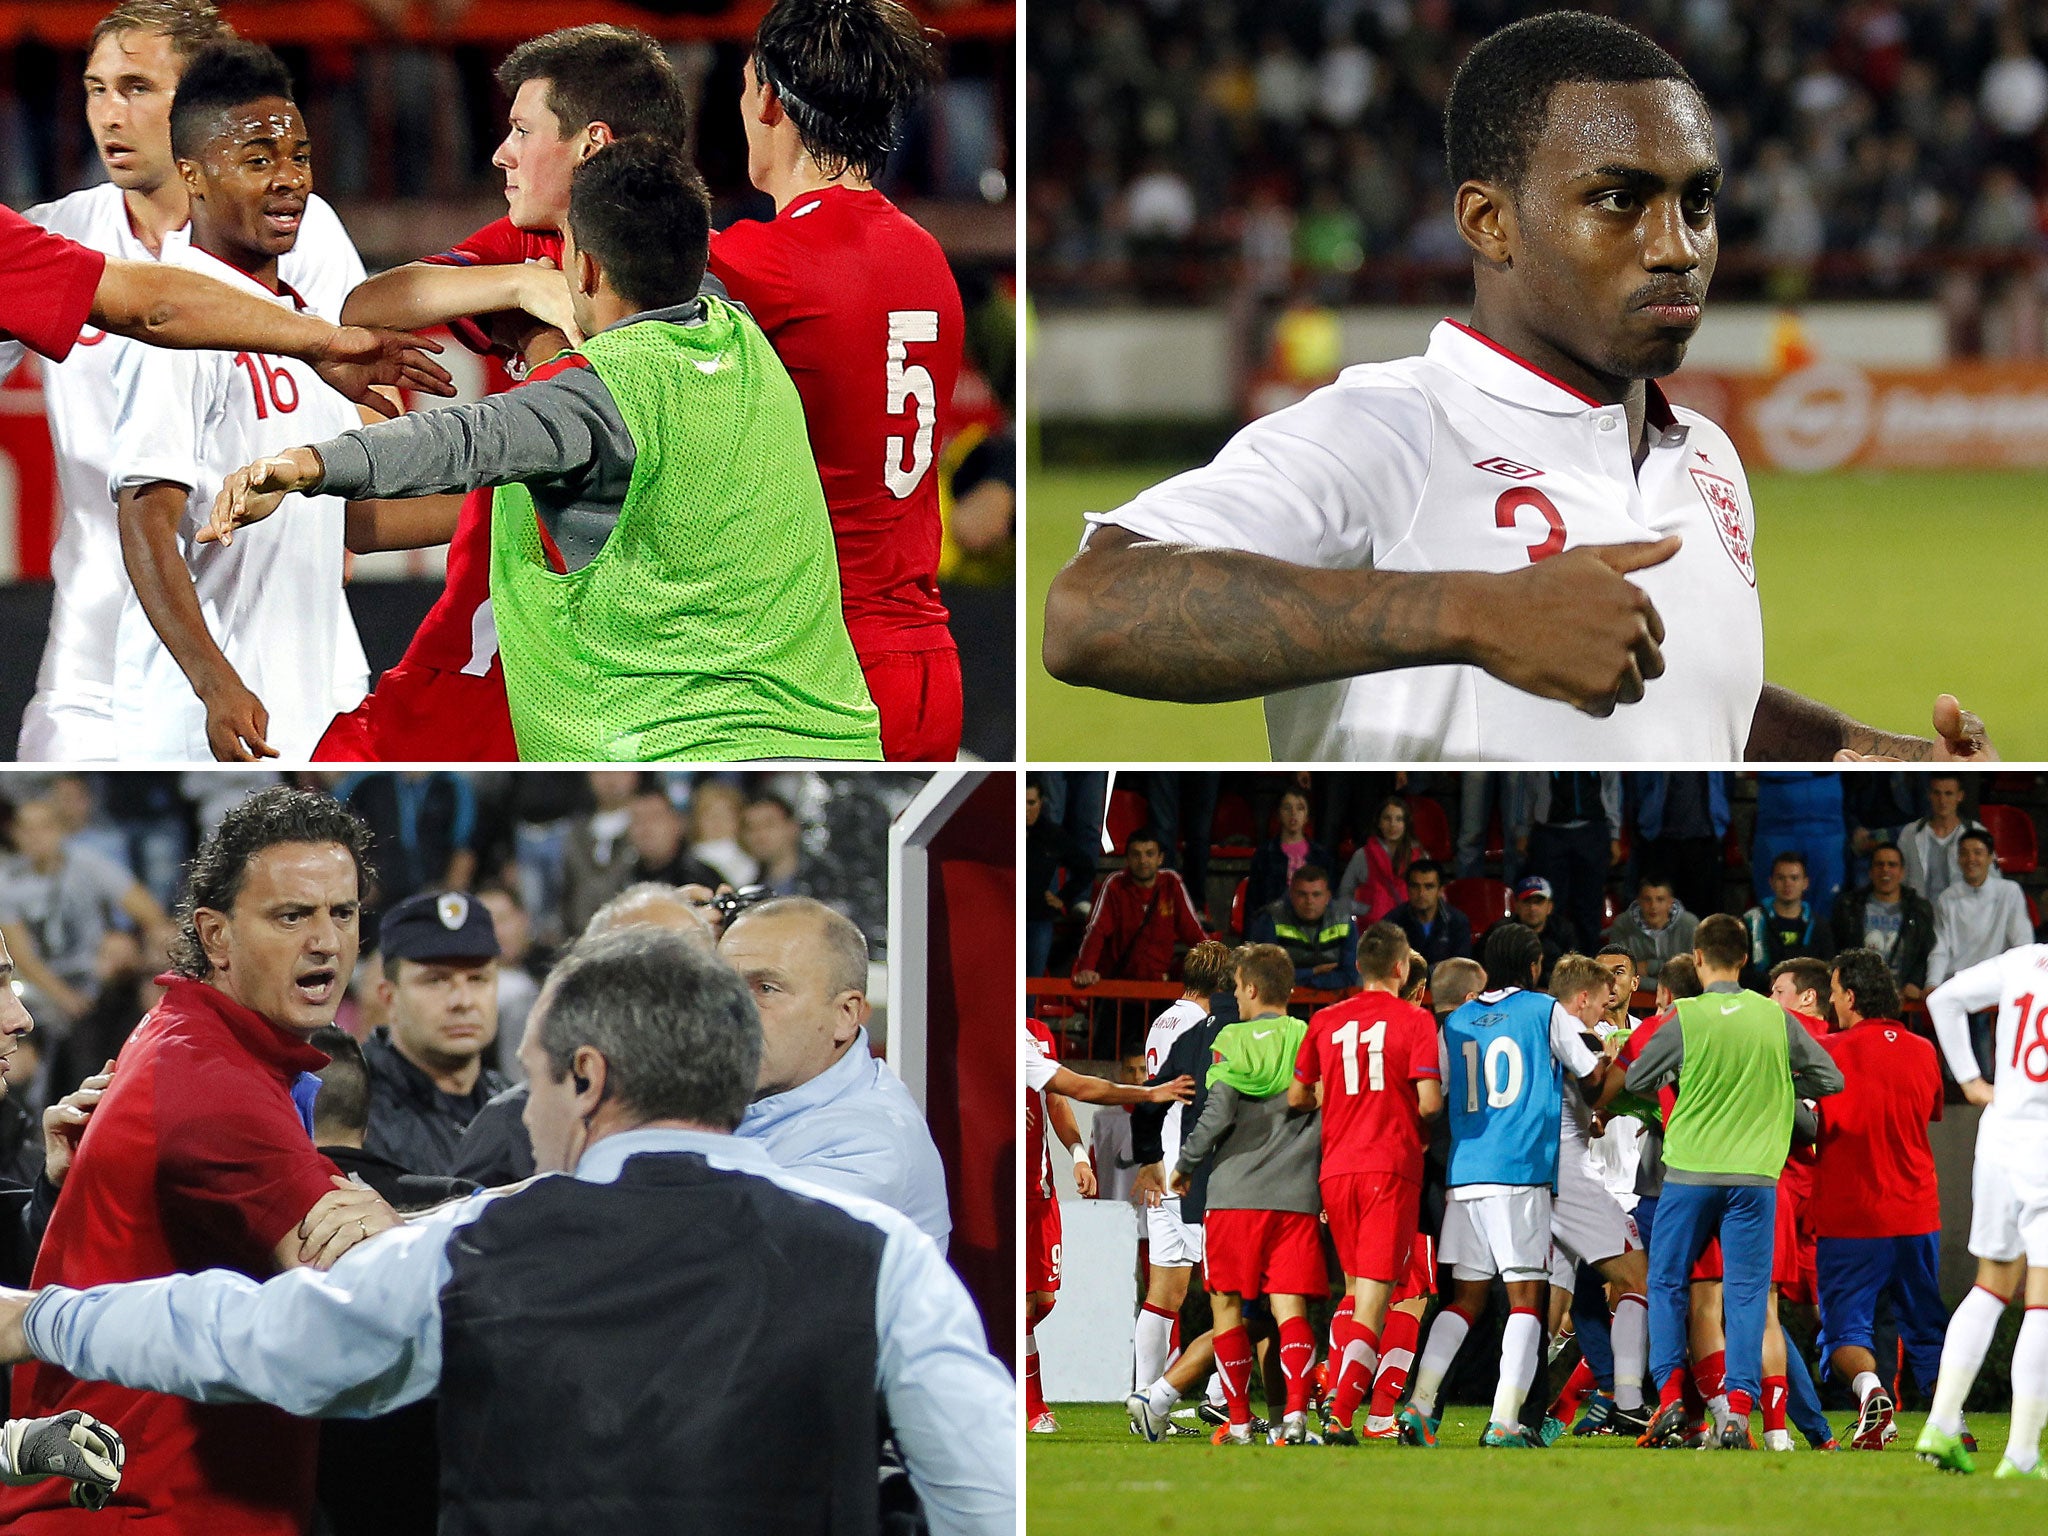 Clockwise from top left: Raheem Sterling amid the fracas, Danny Rose mimics the fans' taunts, the squad players enter the fray and Serbian assistant coach Dejan Govedarica struggles to separate his players